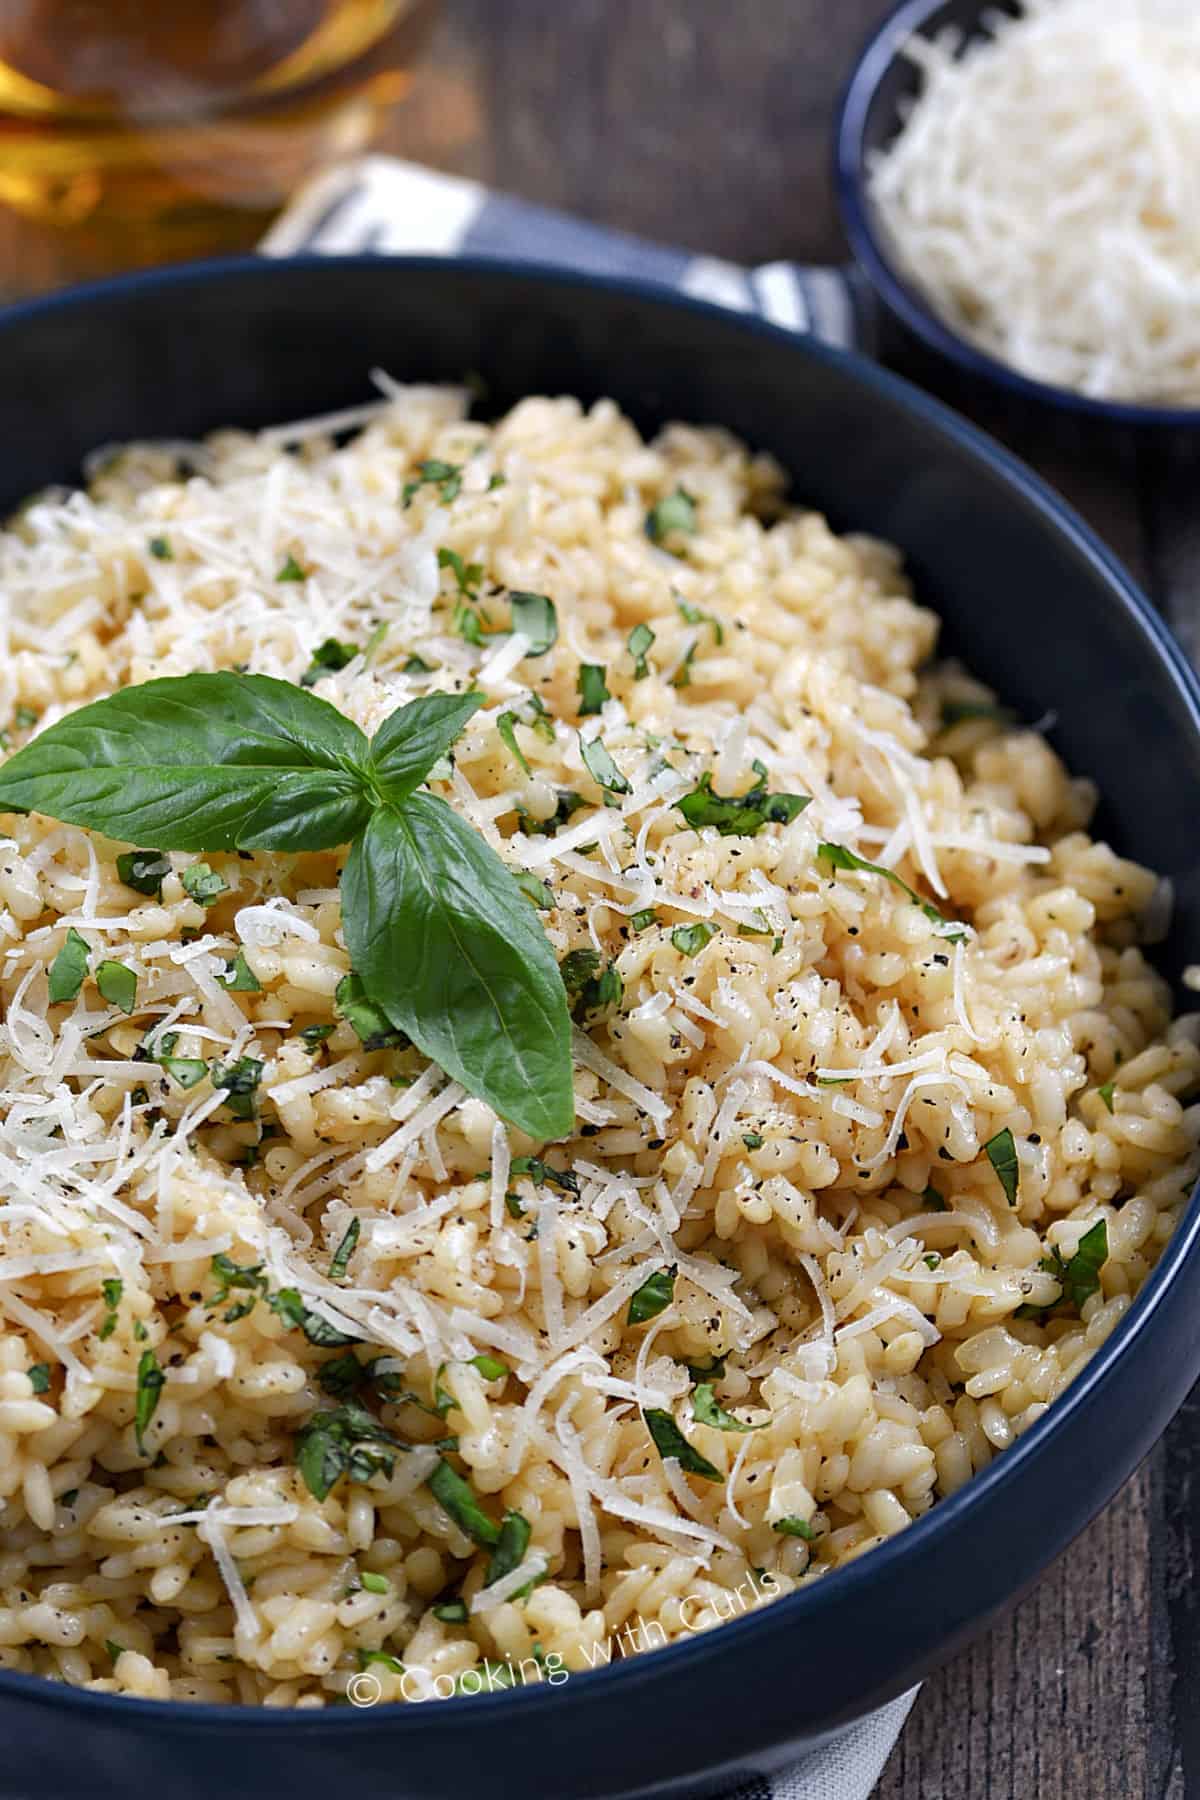 A close-up image of a large bowl filled with basil risotto topped with fresh basil leaves and grated parmesan cheese.